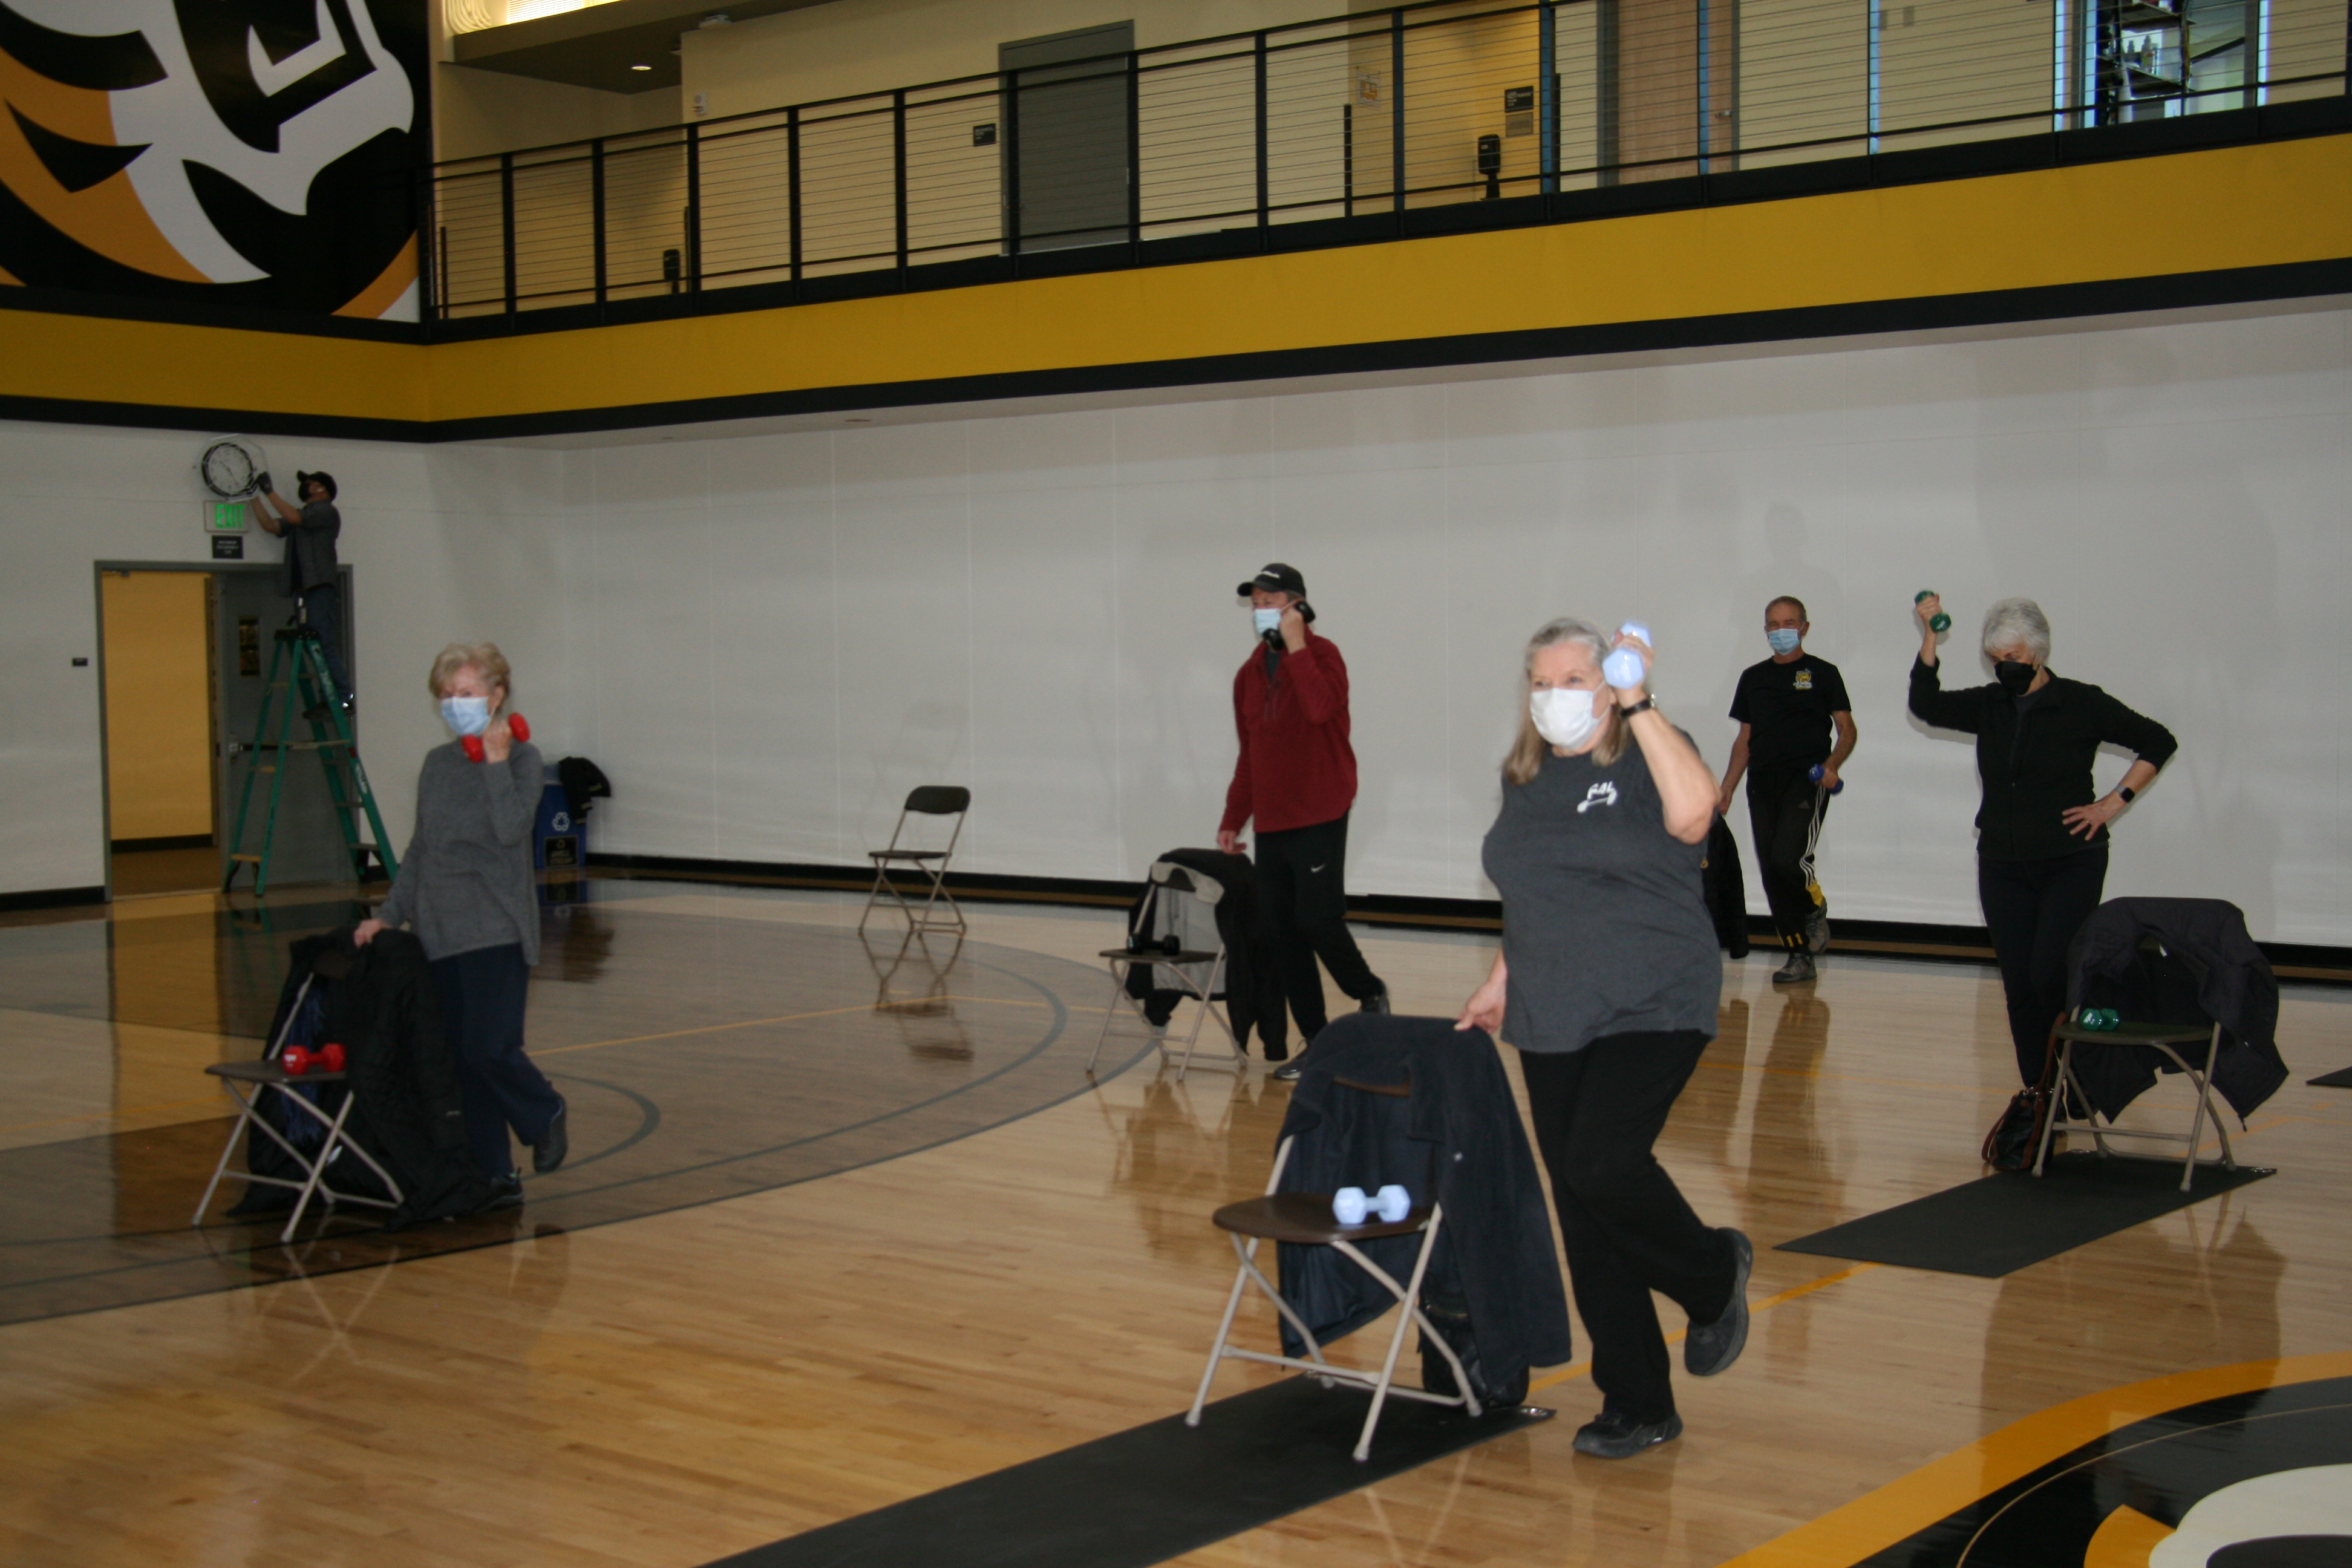 Fit 4 Life participants doing group exercises <span class="cc-gallery-credit"></span>